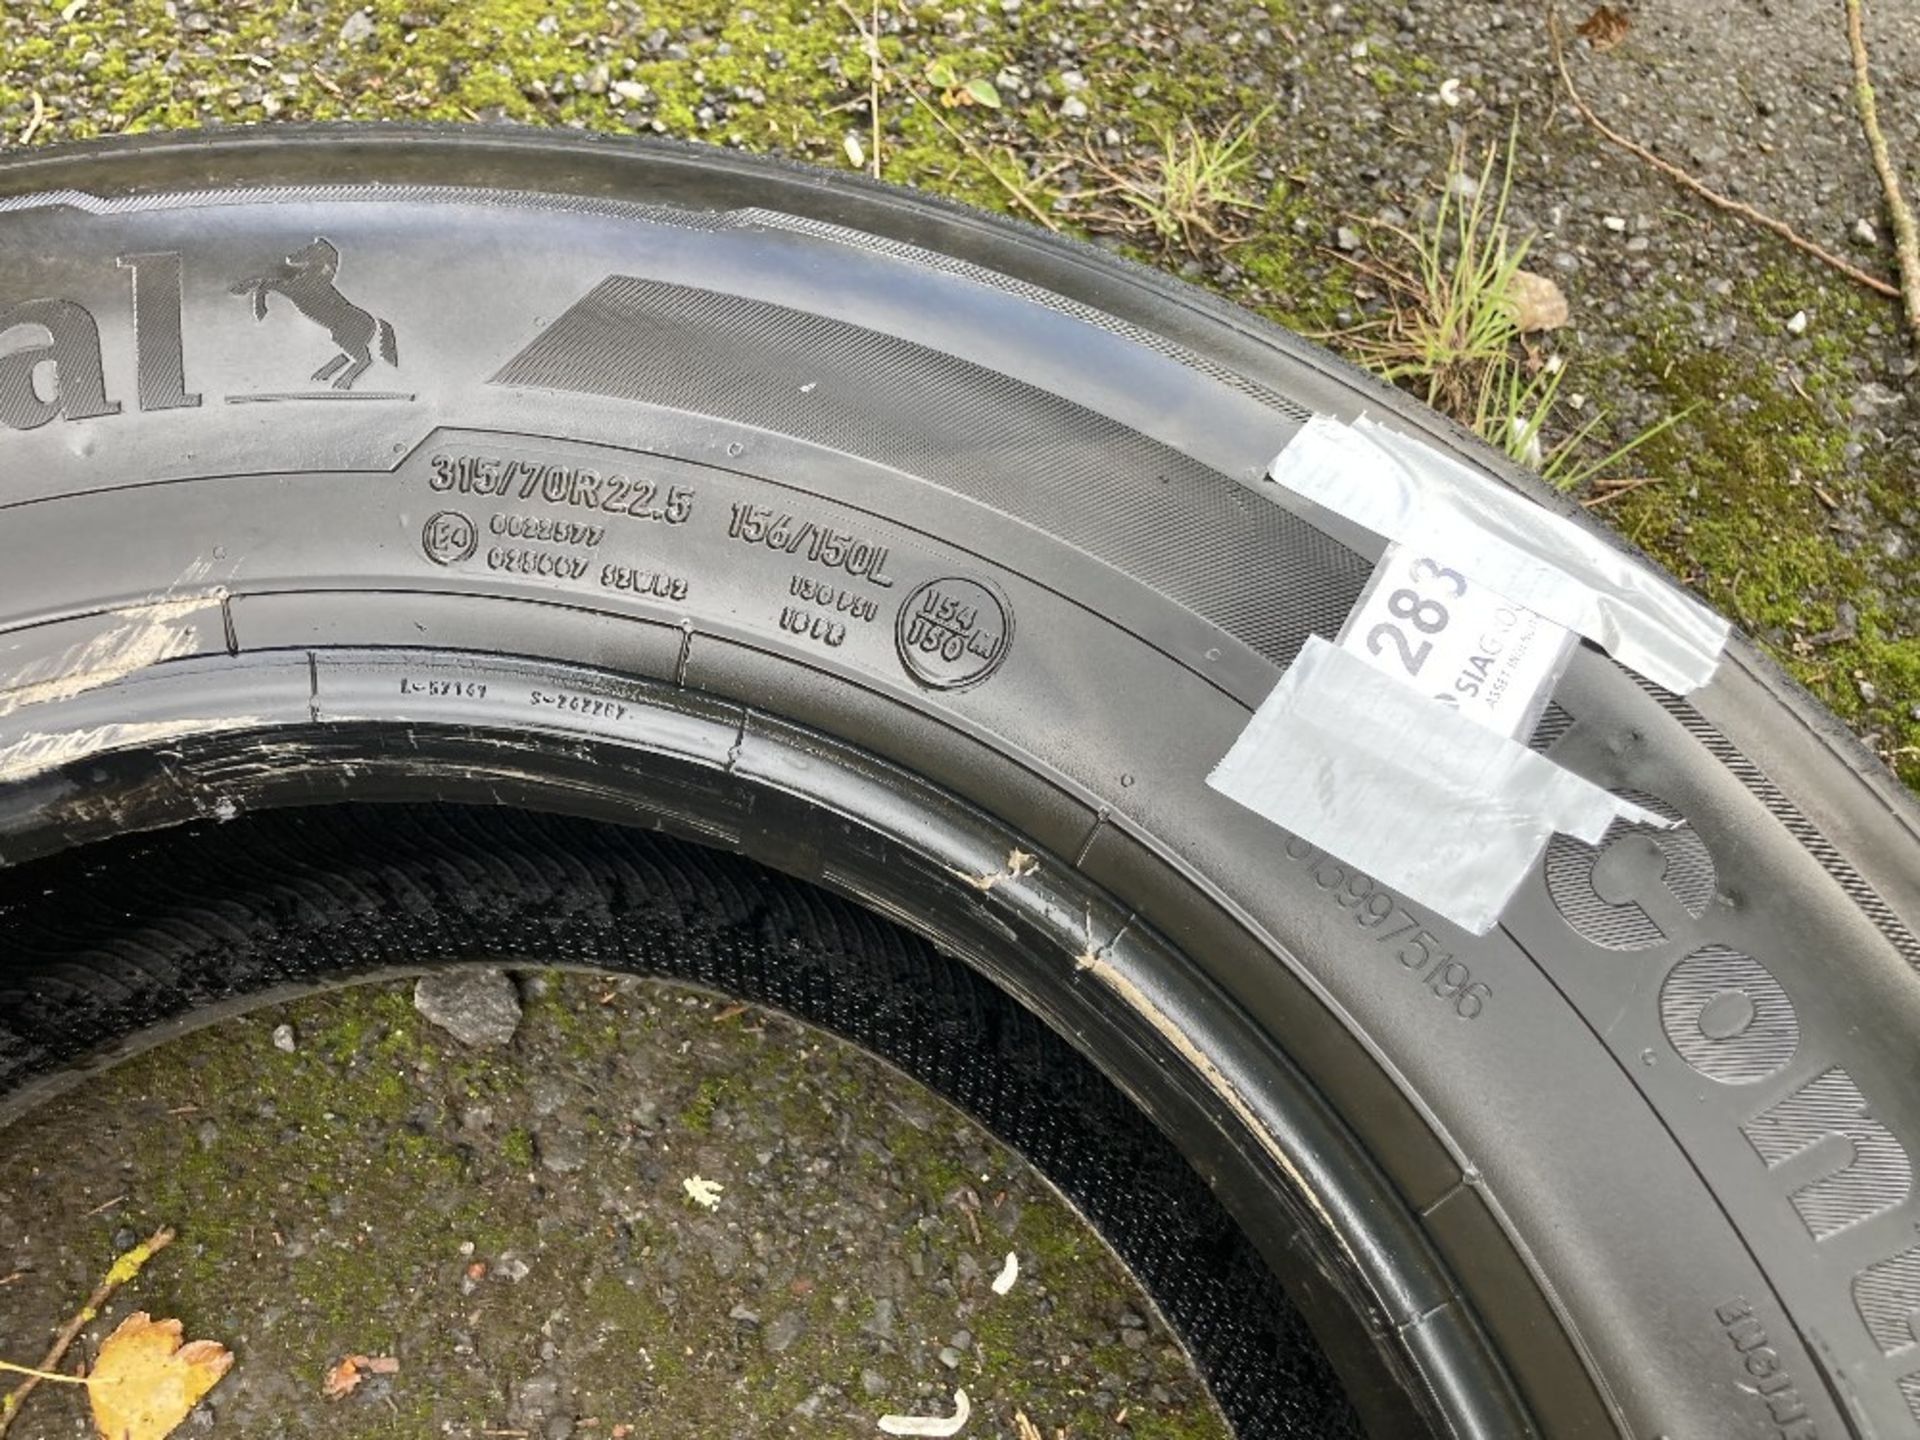 Continental Conti Hybrid HS3 XL 315/70R 22.5 radial tubeless regroovable HGV tyre - Image 4 of 6